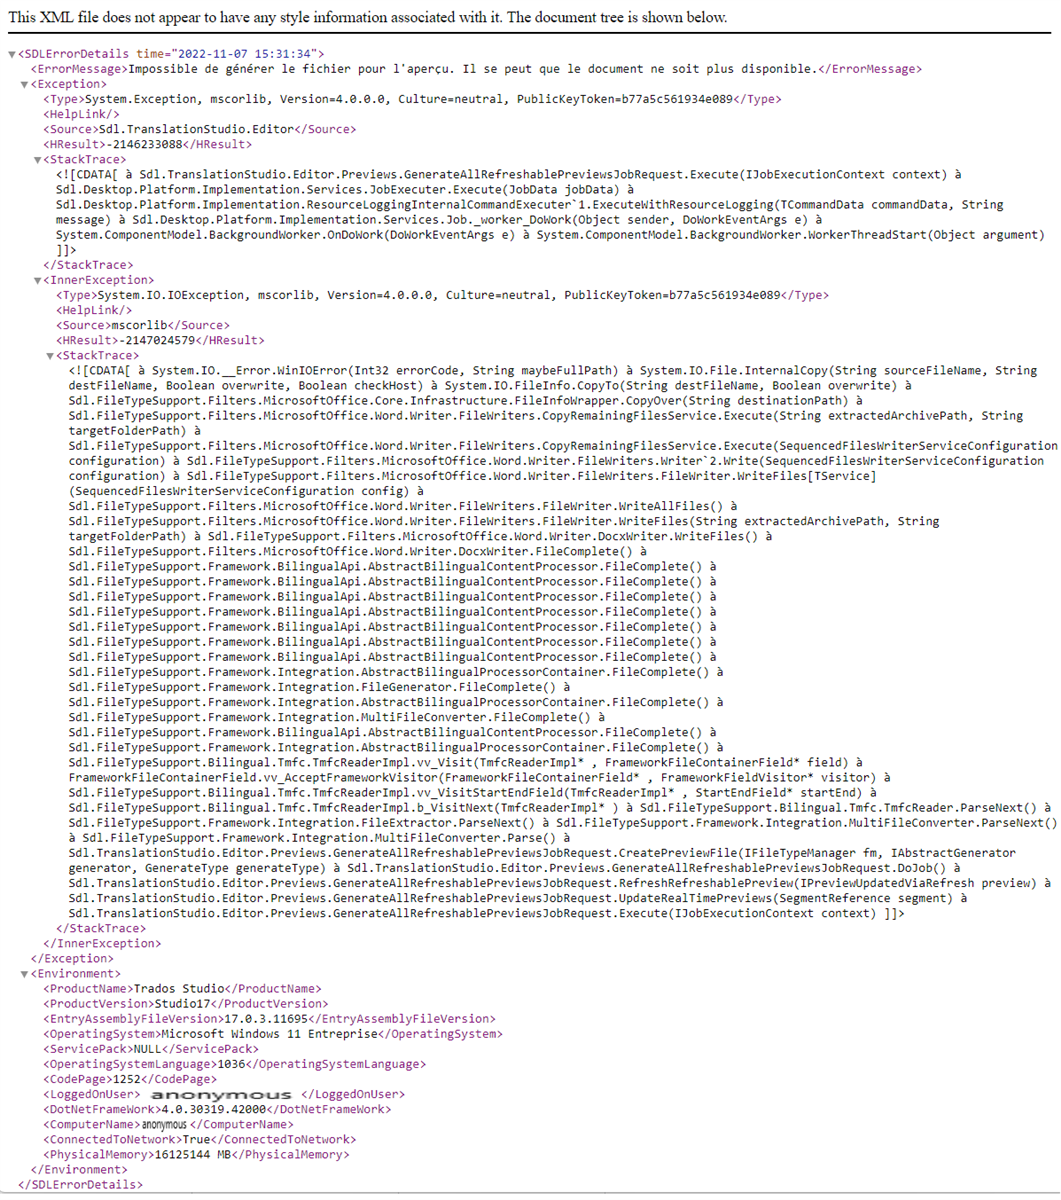 Screenshot of Trados Studio error stack with a message 'This XML file does not appear to have any style information associated with it. The document tree is shown below.' followed by error details including 'System.Exception' and 'IOException'.